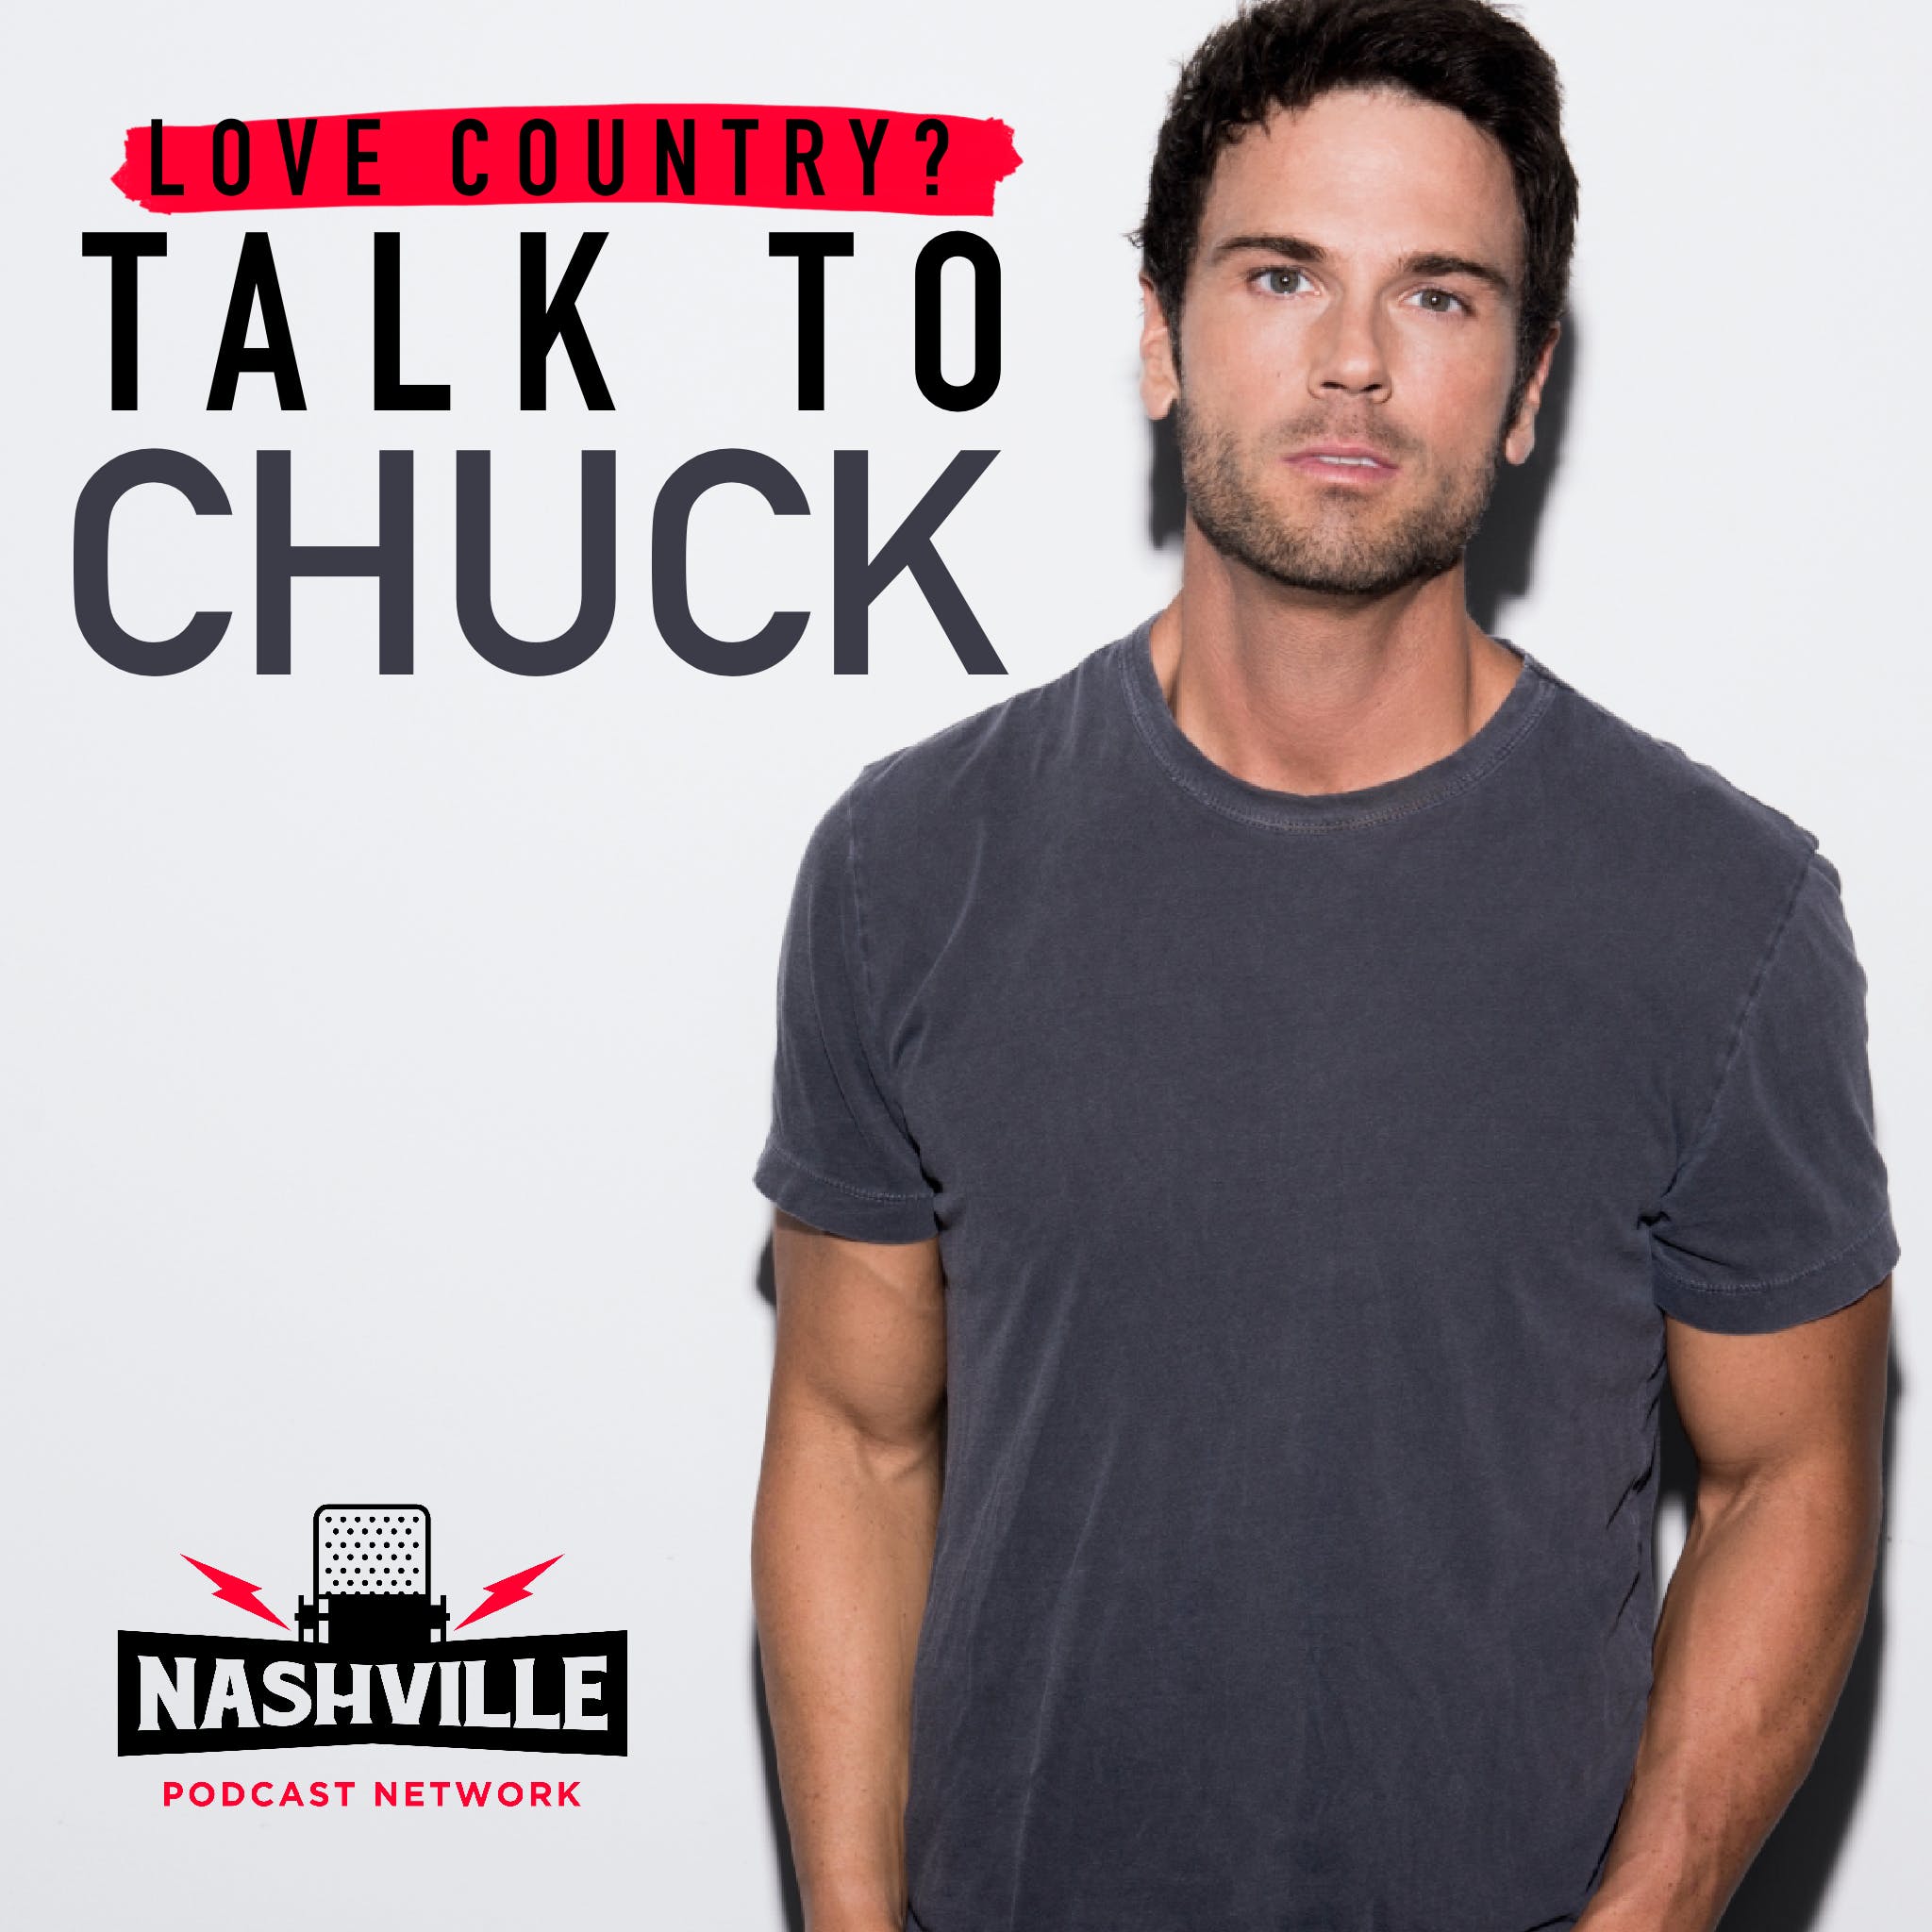 Chuck's Show Is THIS WEEK!  Get Your Tickets Now!